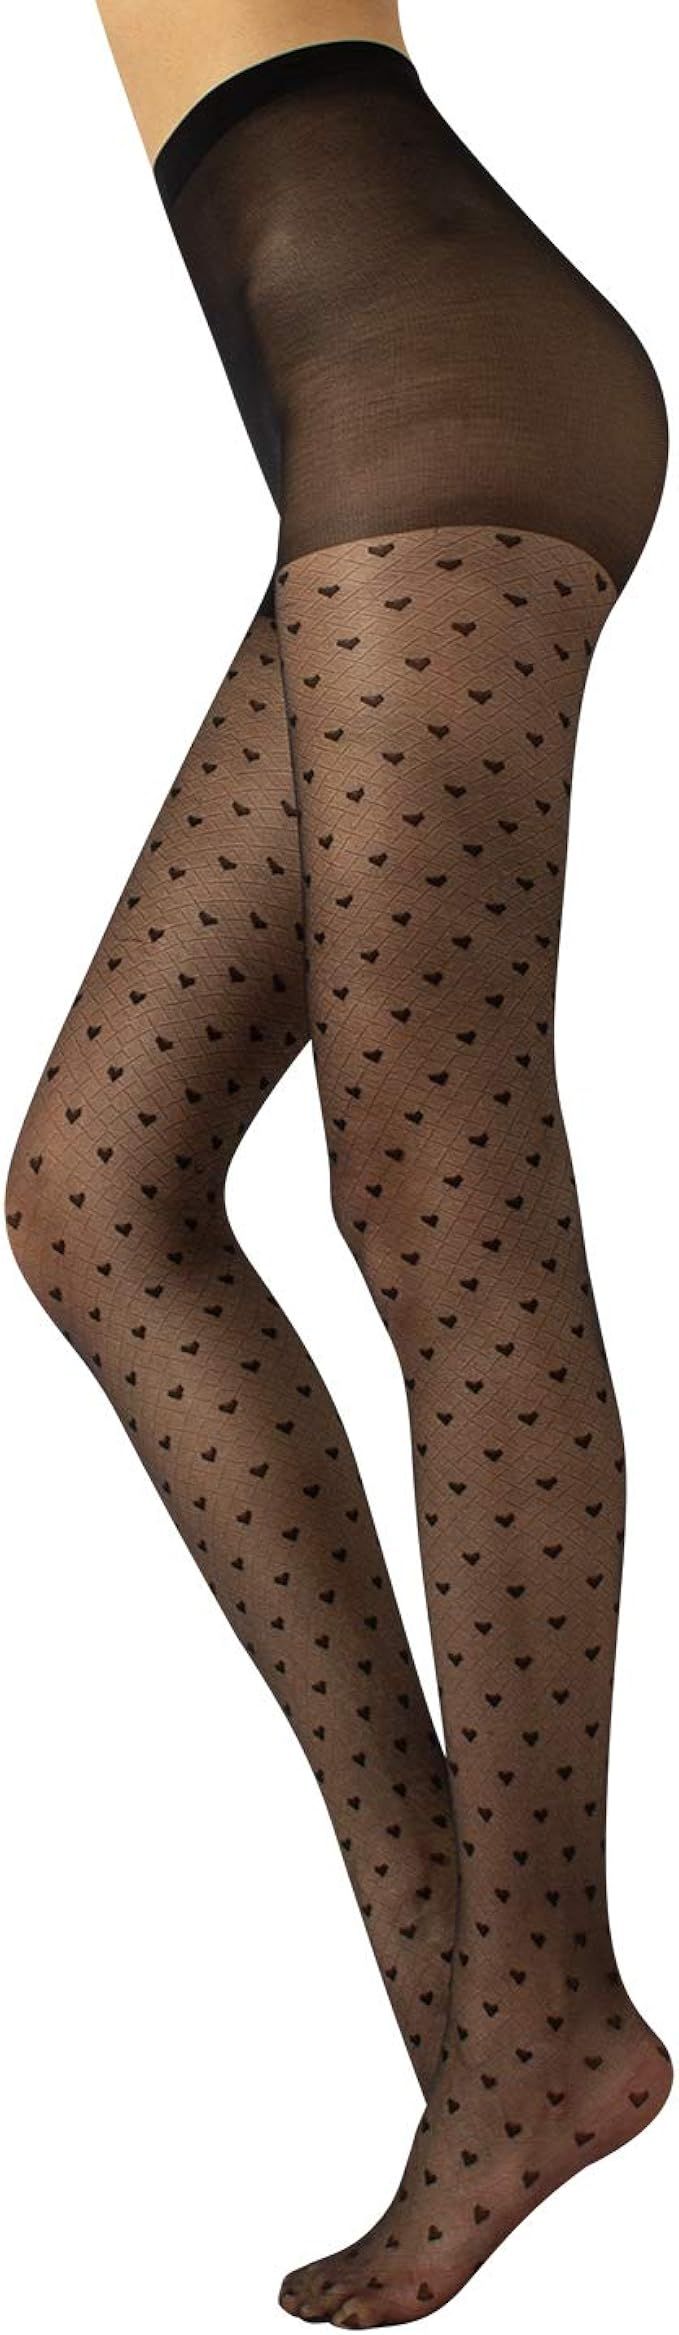 CALZITALY - Sheer Fashion Patterned Tights with Little Hearts | Black | S/M, L/XL | 20 DEN | Made... | Amazon (US)